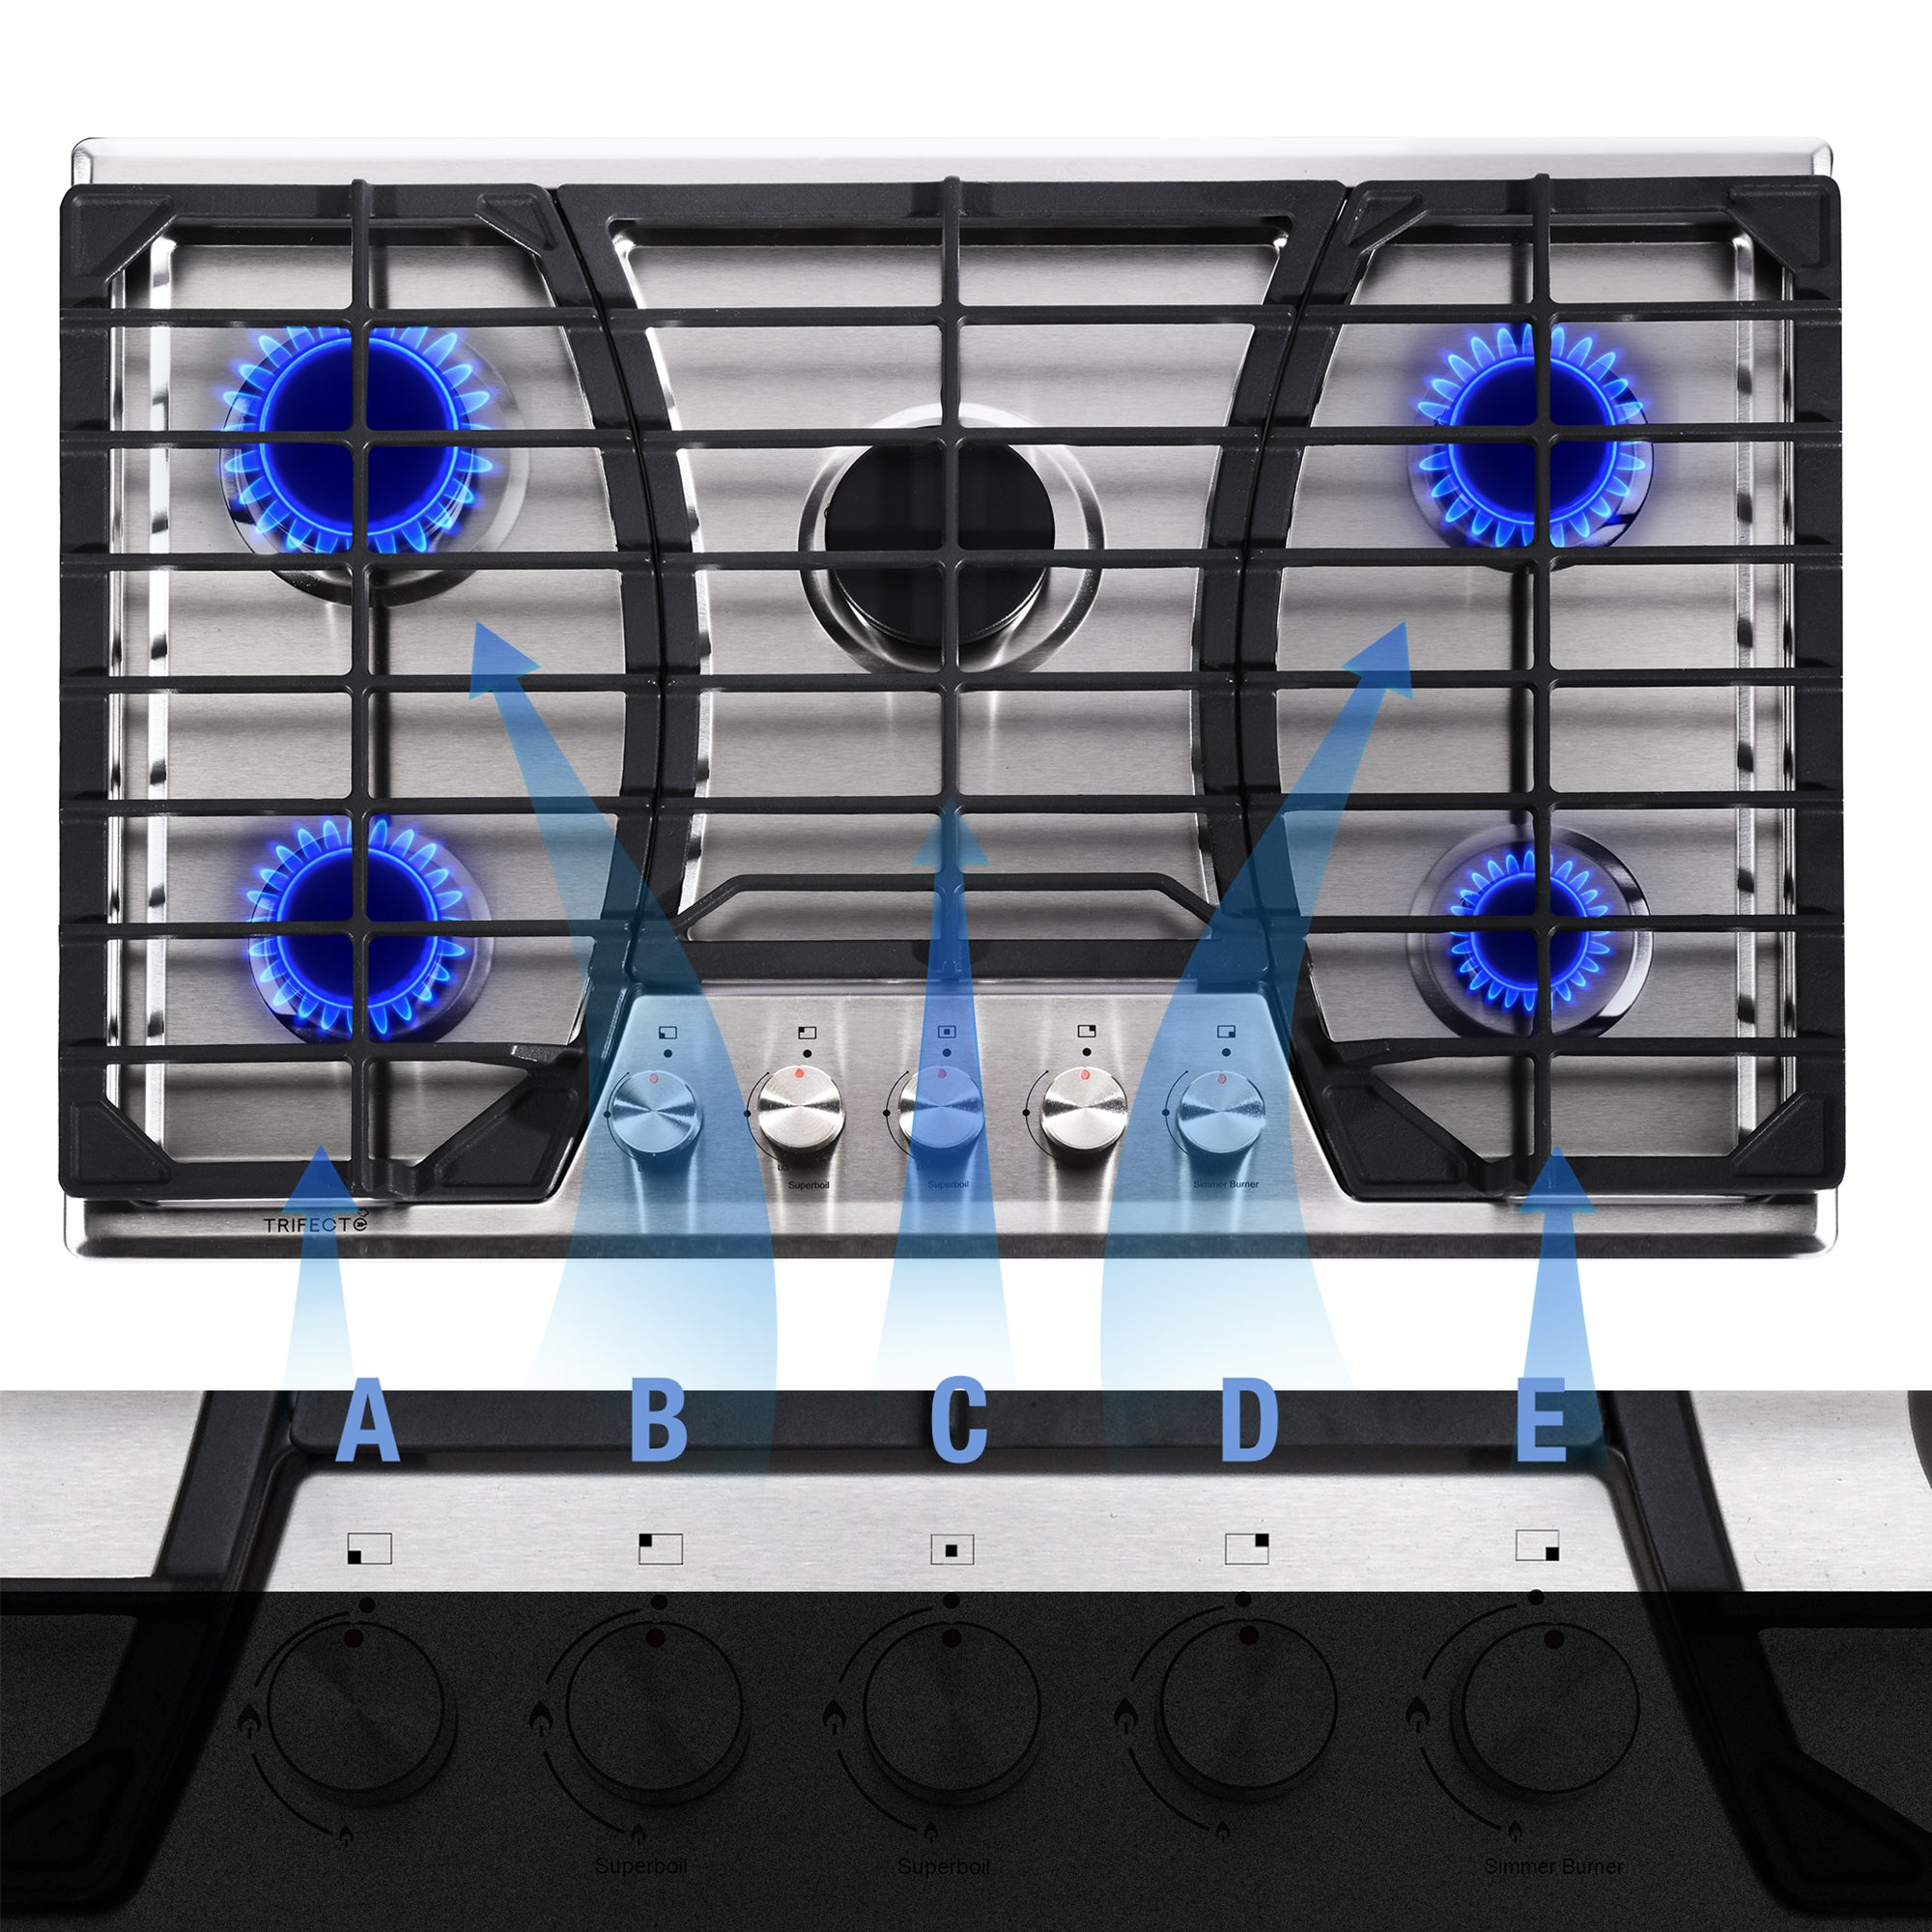 Gustoso 30 inch Gas Cooktops with 5 Burner